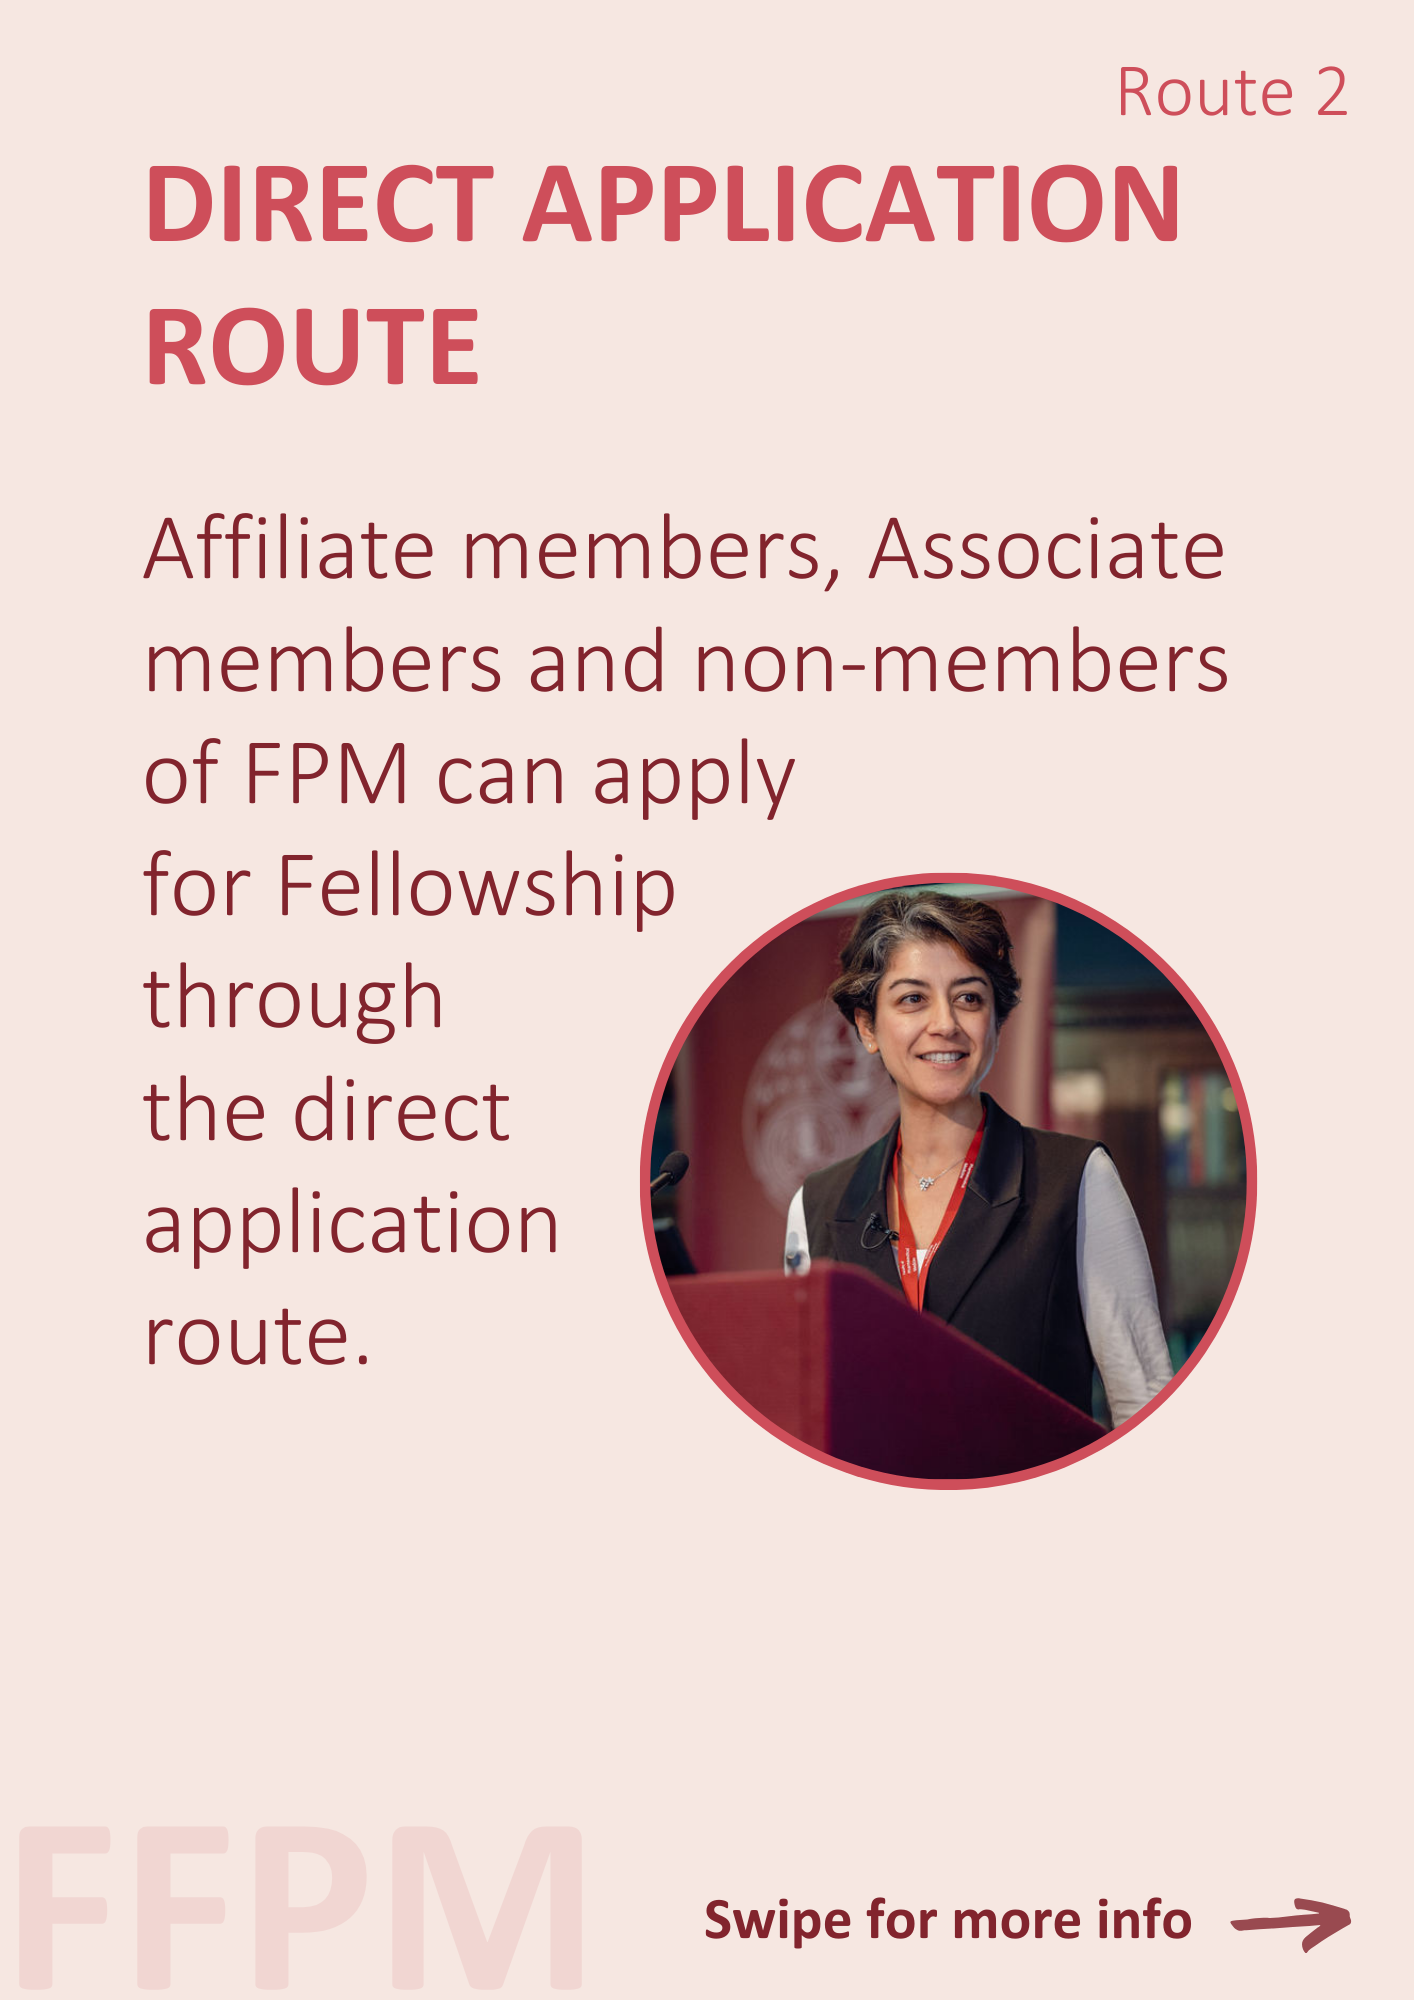 Direct Application Route. Affiliate members, Associate members and non-members of FPM can apply for Fellowship through the direct application route.